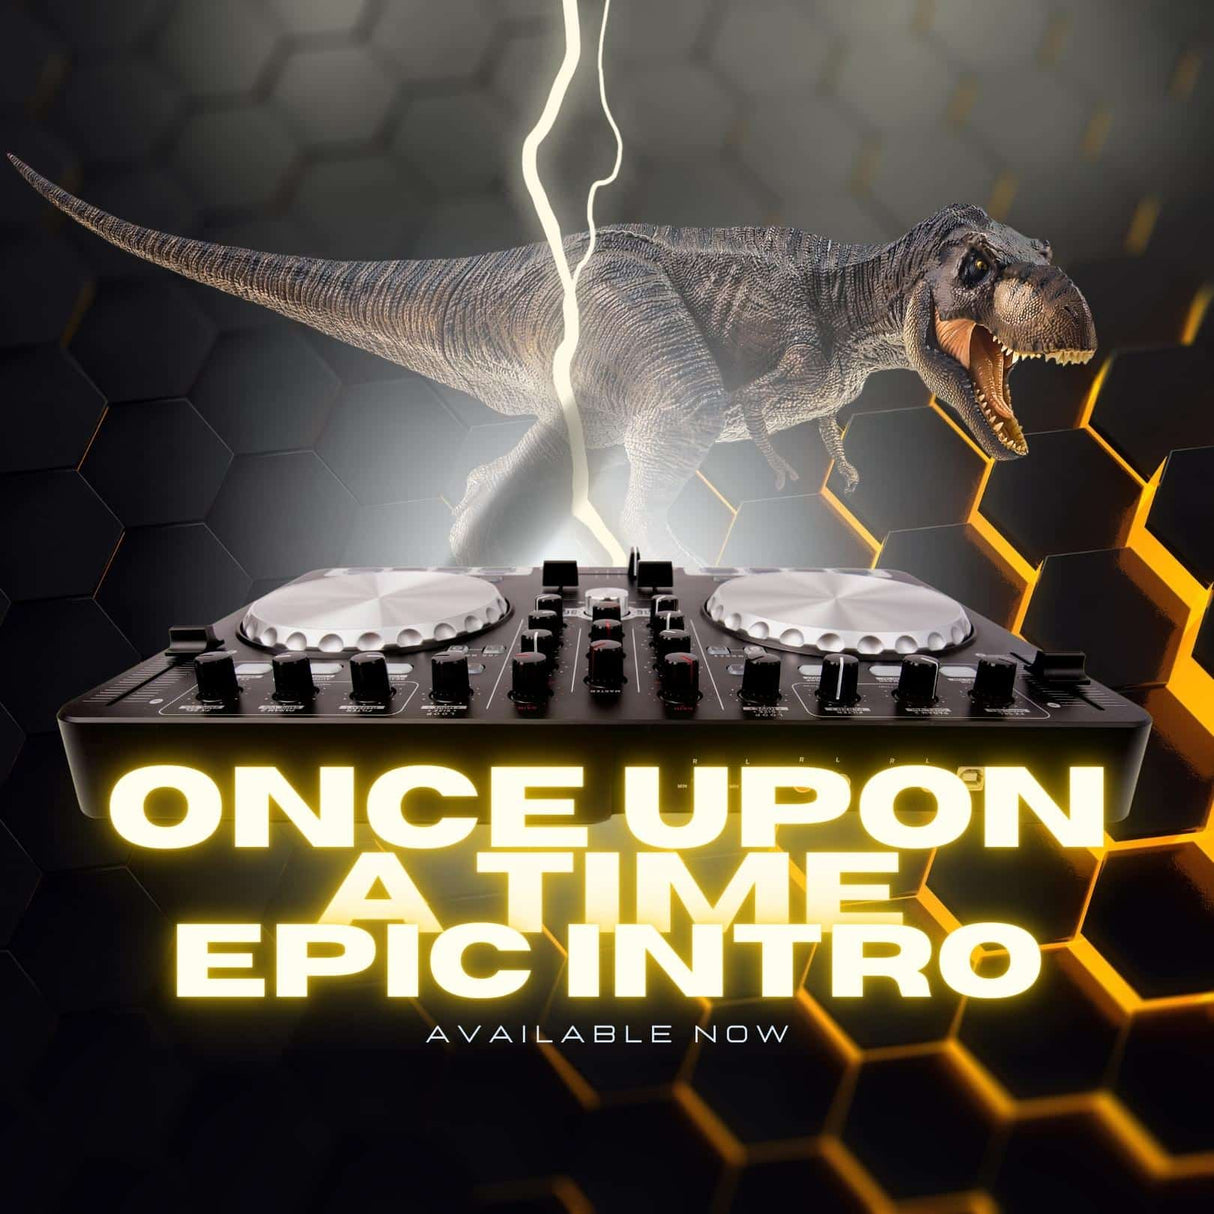 Epic DJ Intro "Once upon a time"